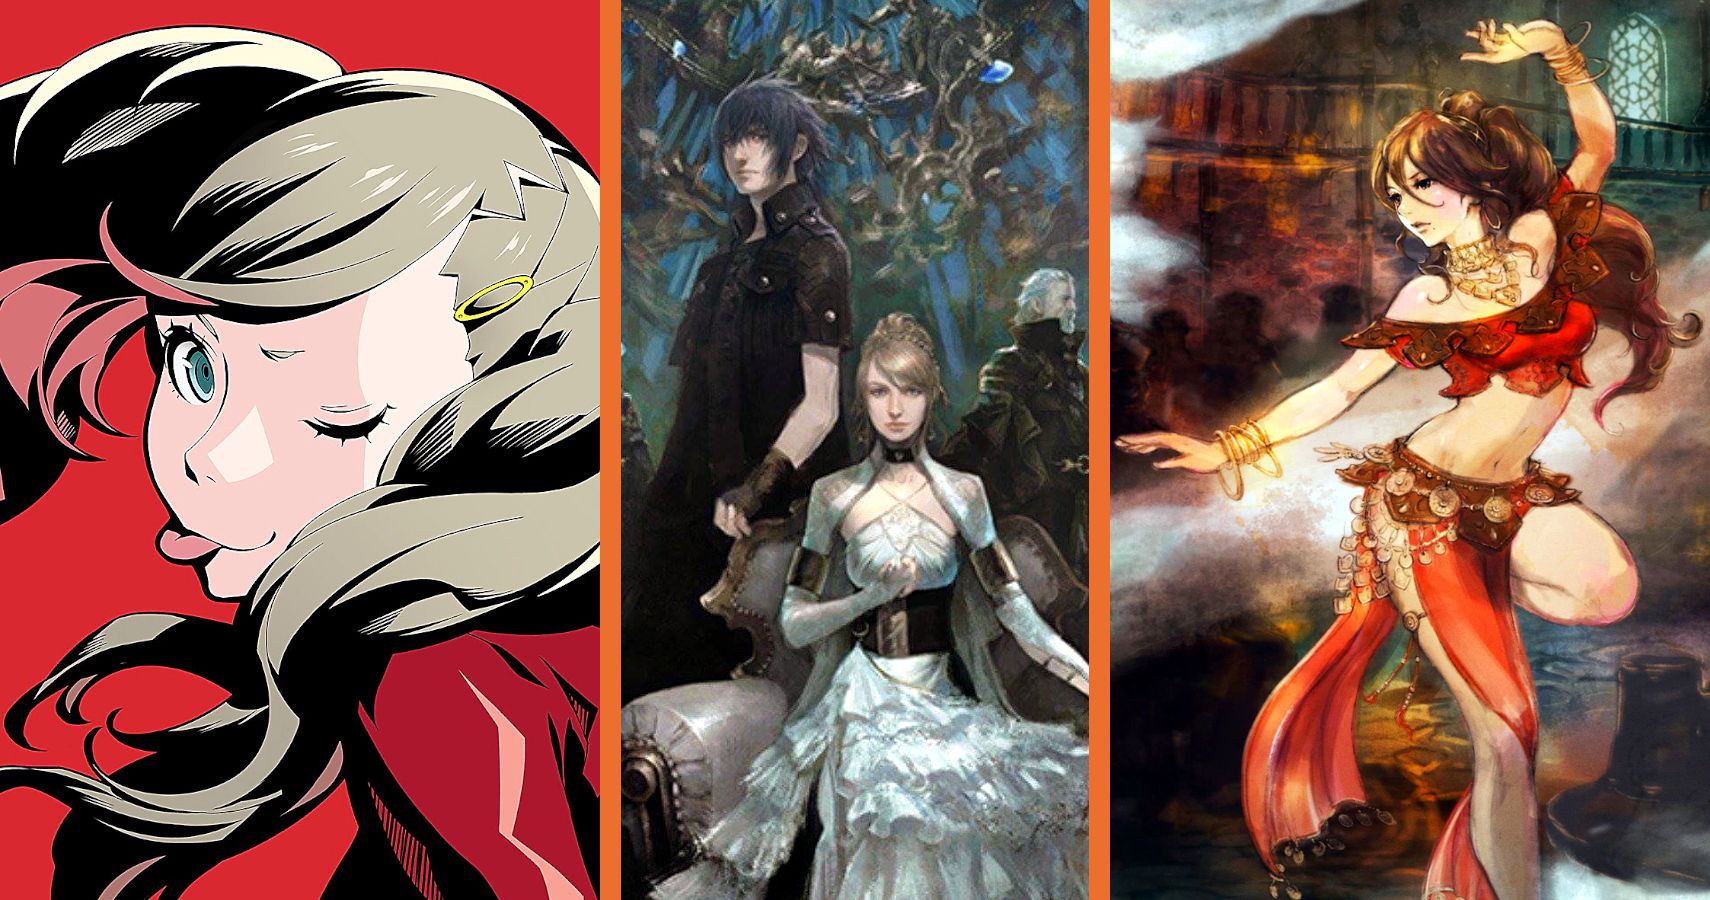 The 10 Best JRPG Developers According To Metacritic, Ranked